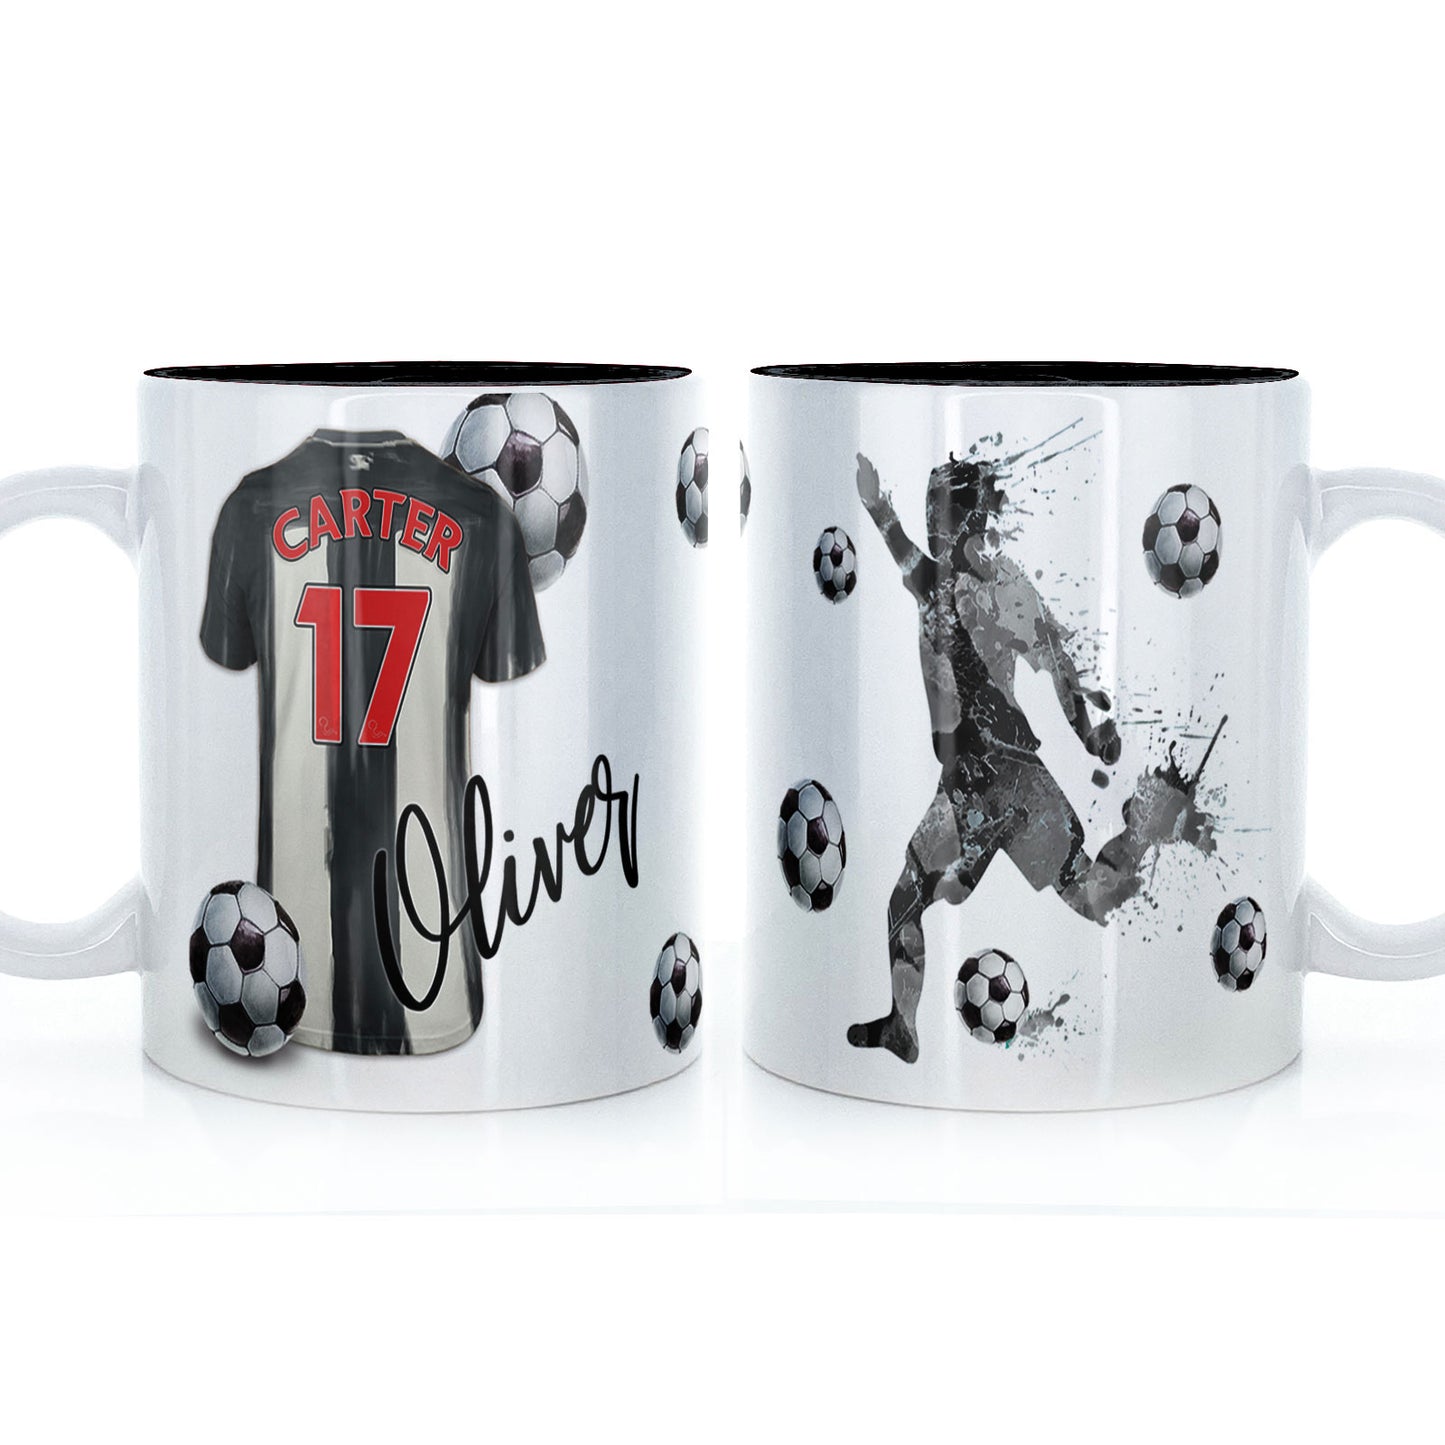 Personalised Mug with Stylish Text and Black & White Striped Shirt with Name & Number